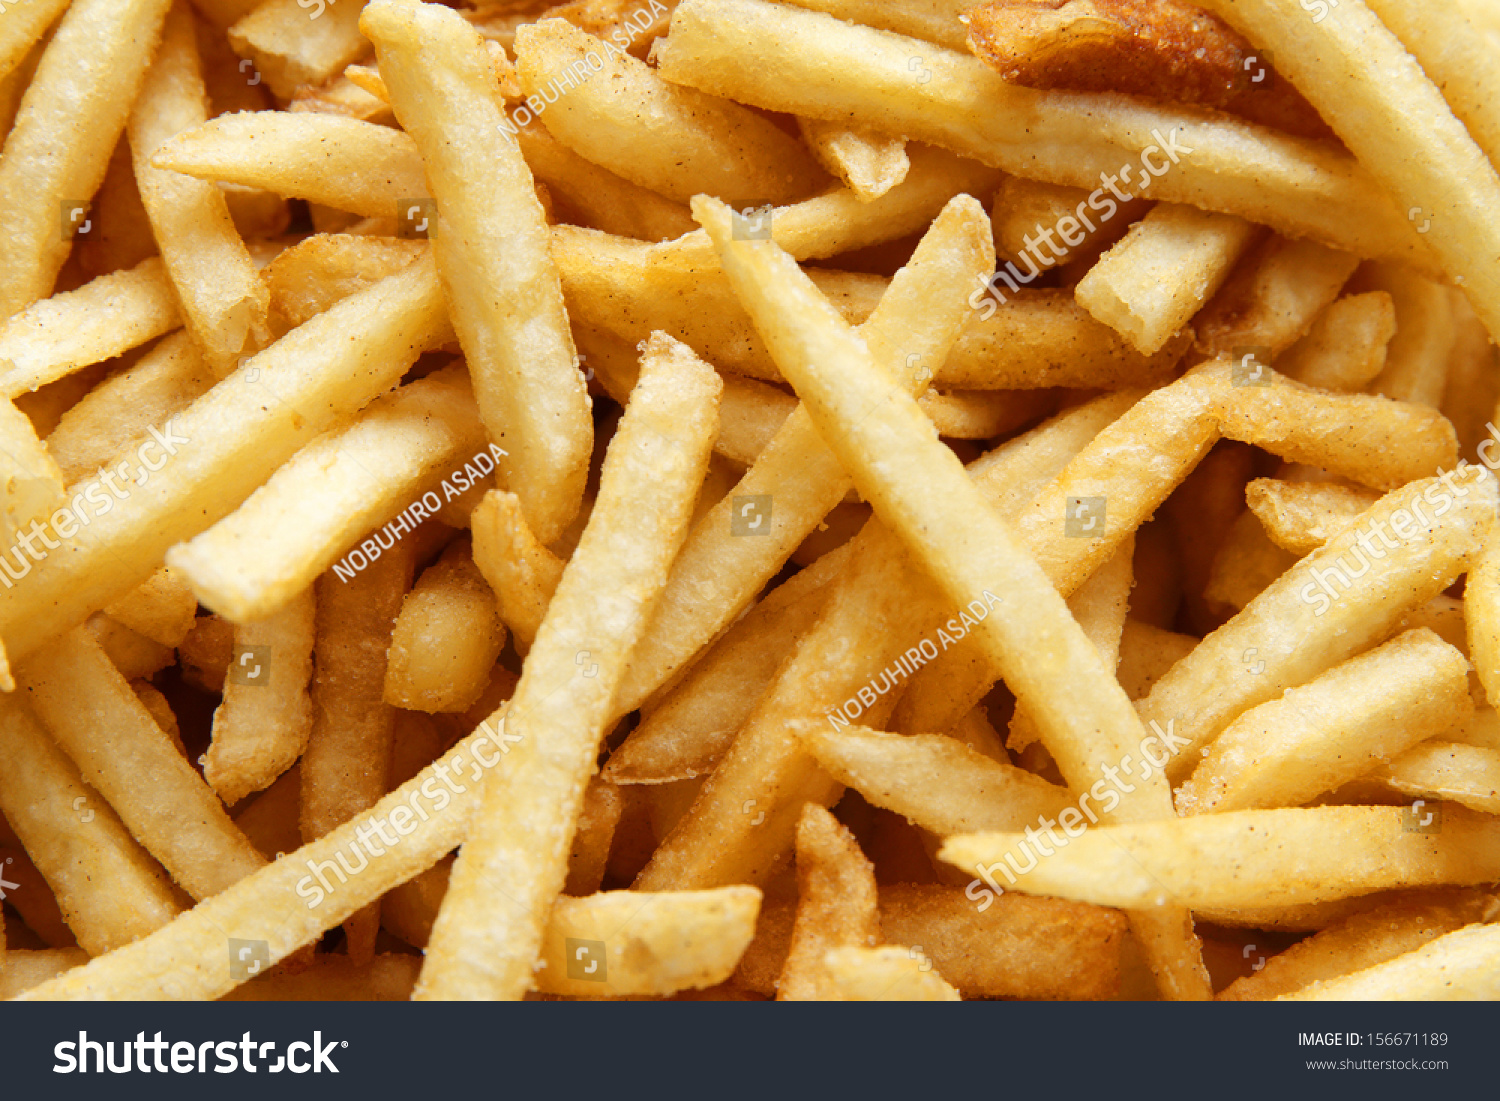 French Fries Stock Photo 156671189 : Shutterstock